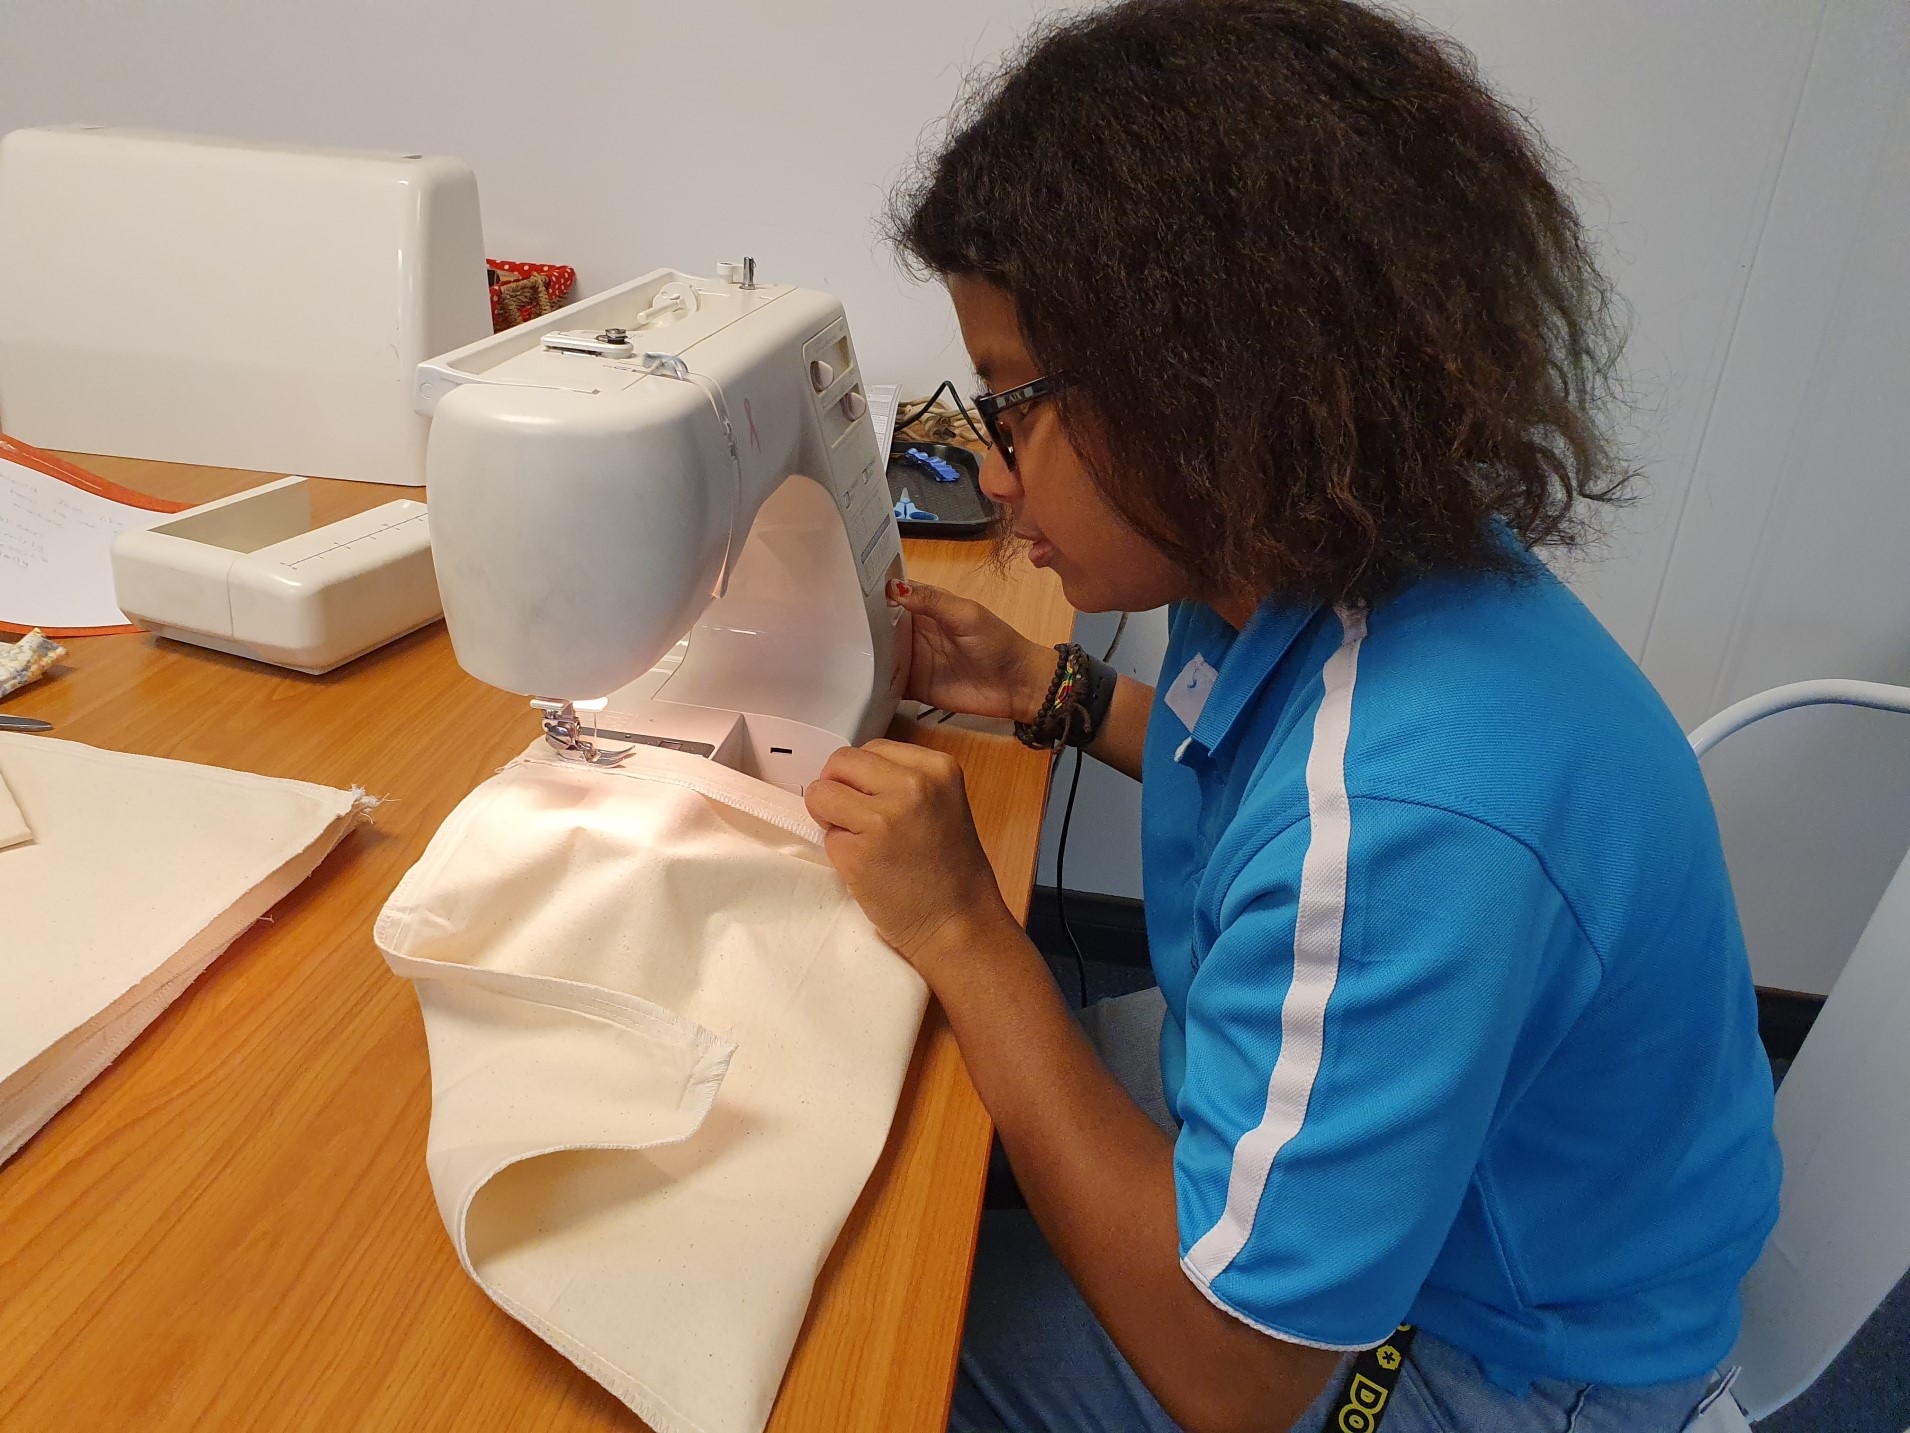 Faradiba at work, sitting with a sewing machine